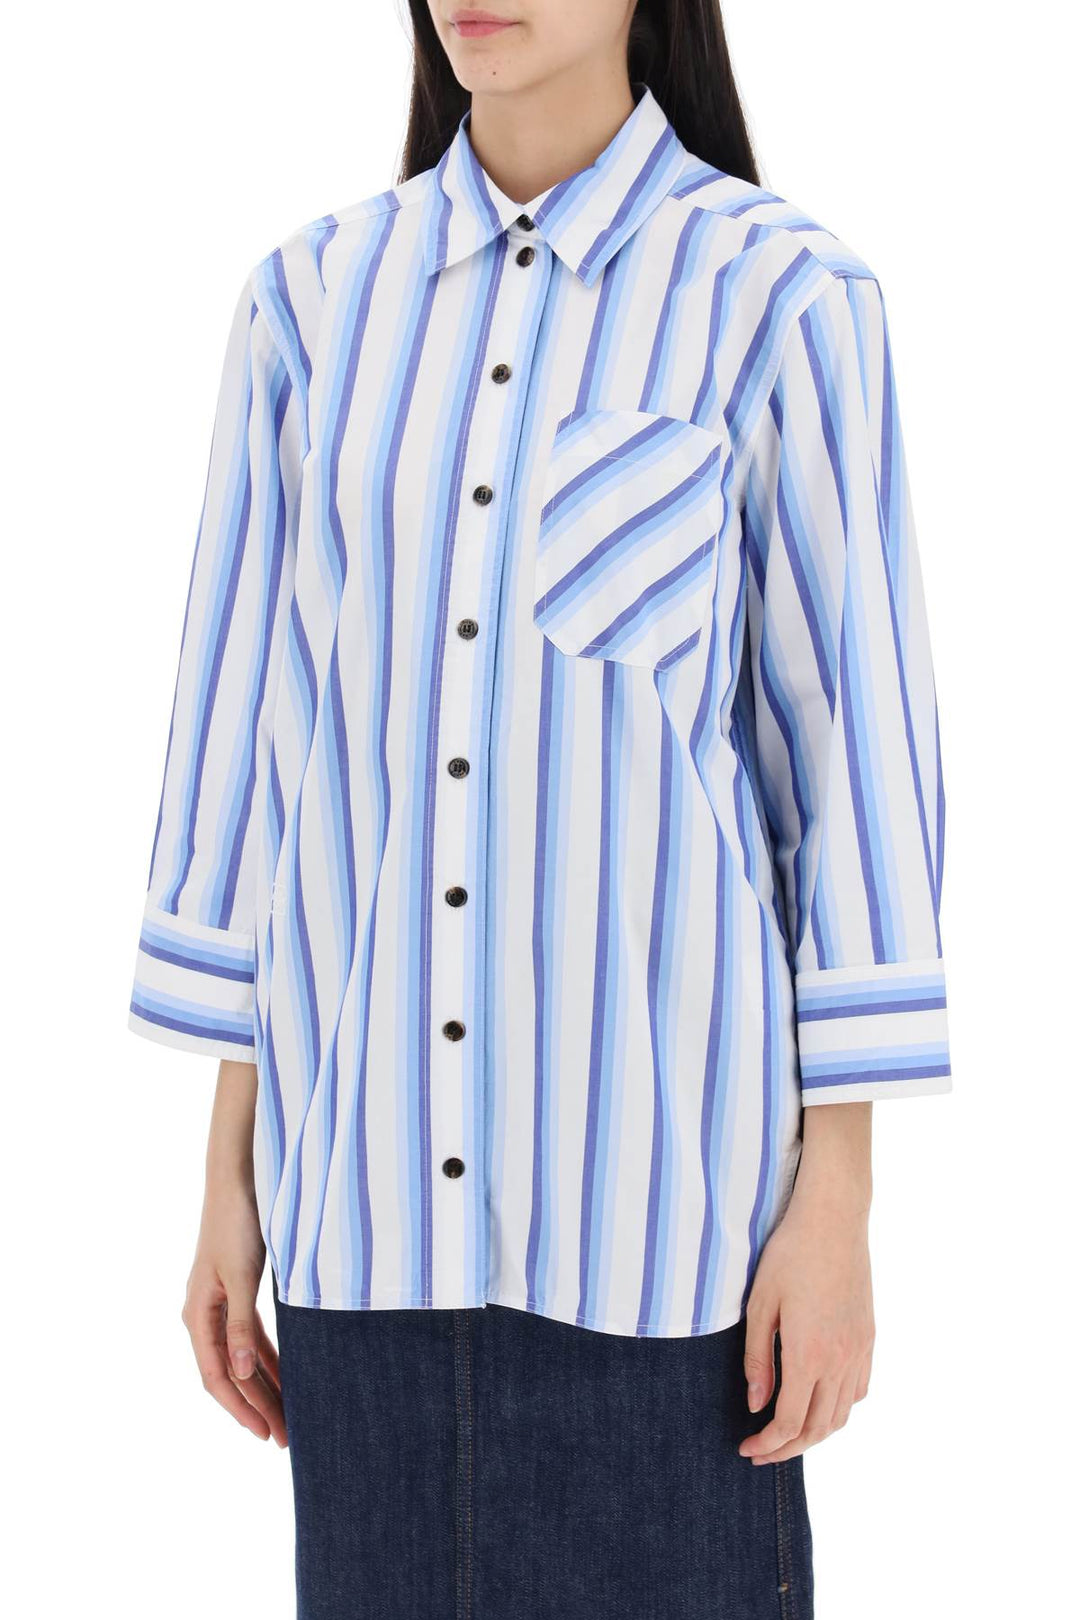 Ganni Replace With Double Quoteoversized Striped Poplin Shirt   White